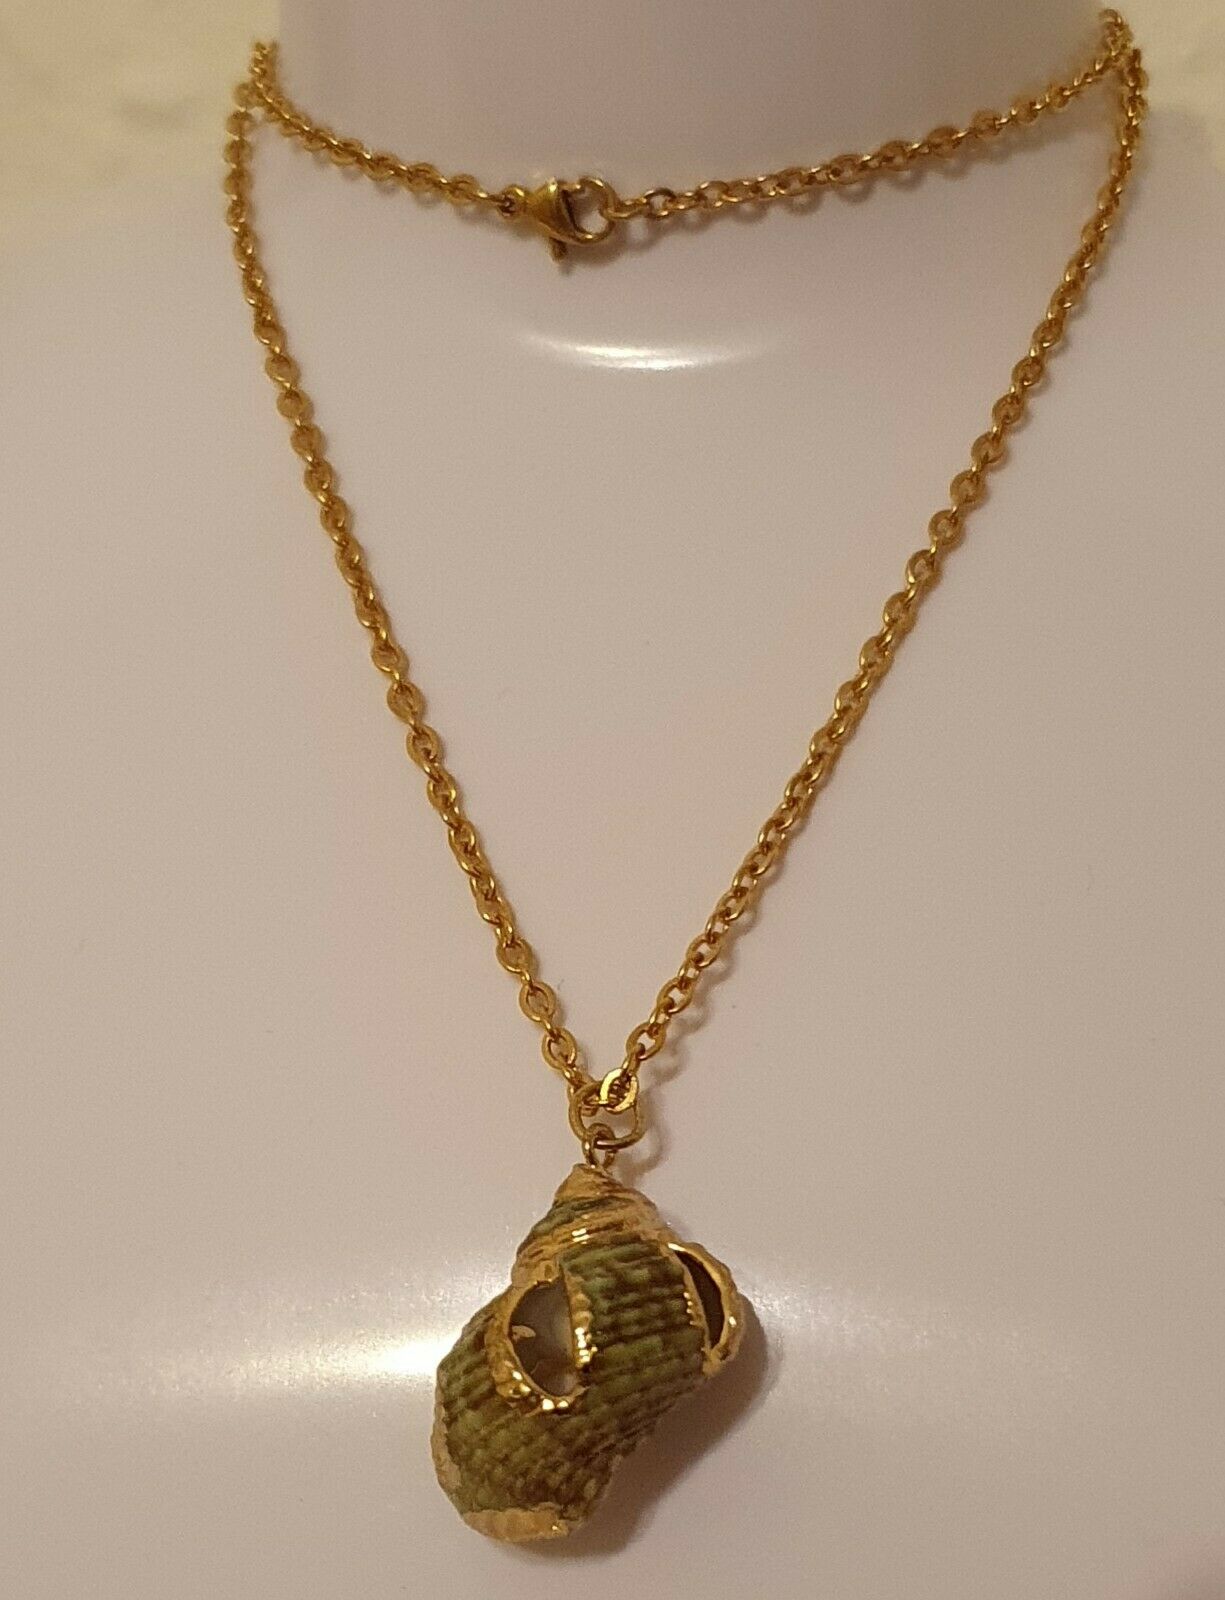 Natural Shell Pendant Gold Plated Chain Necklace